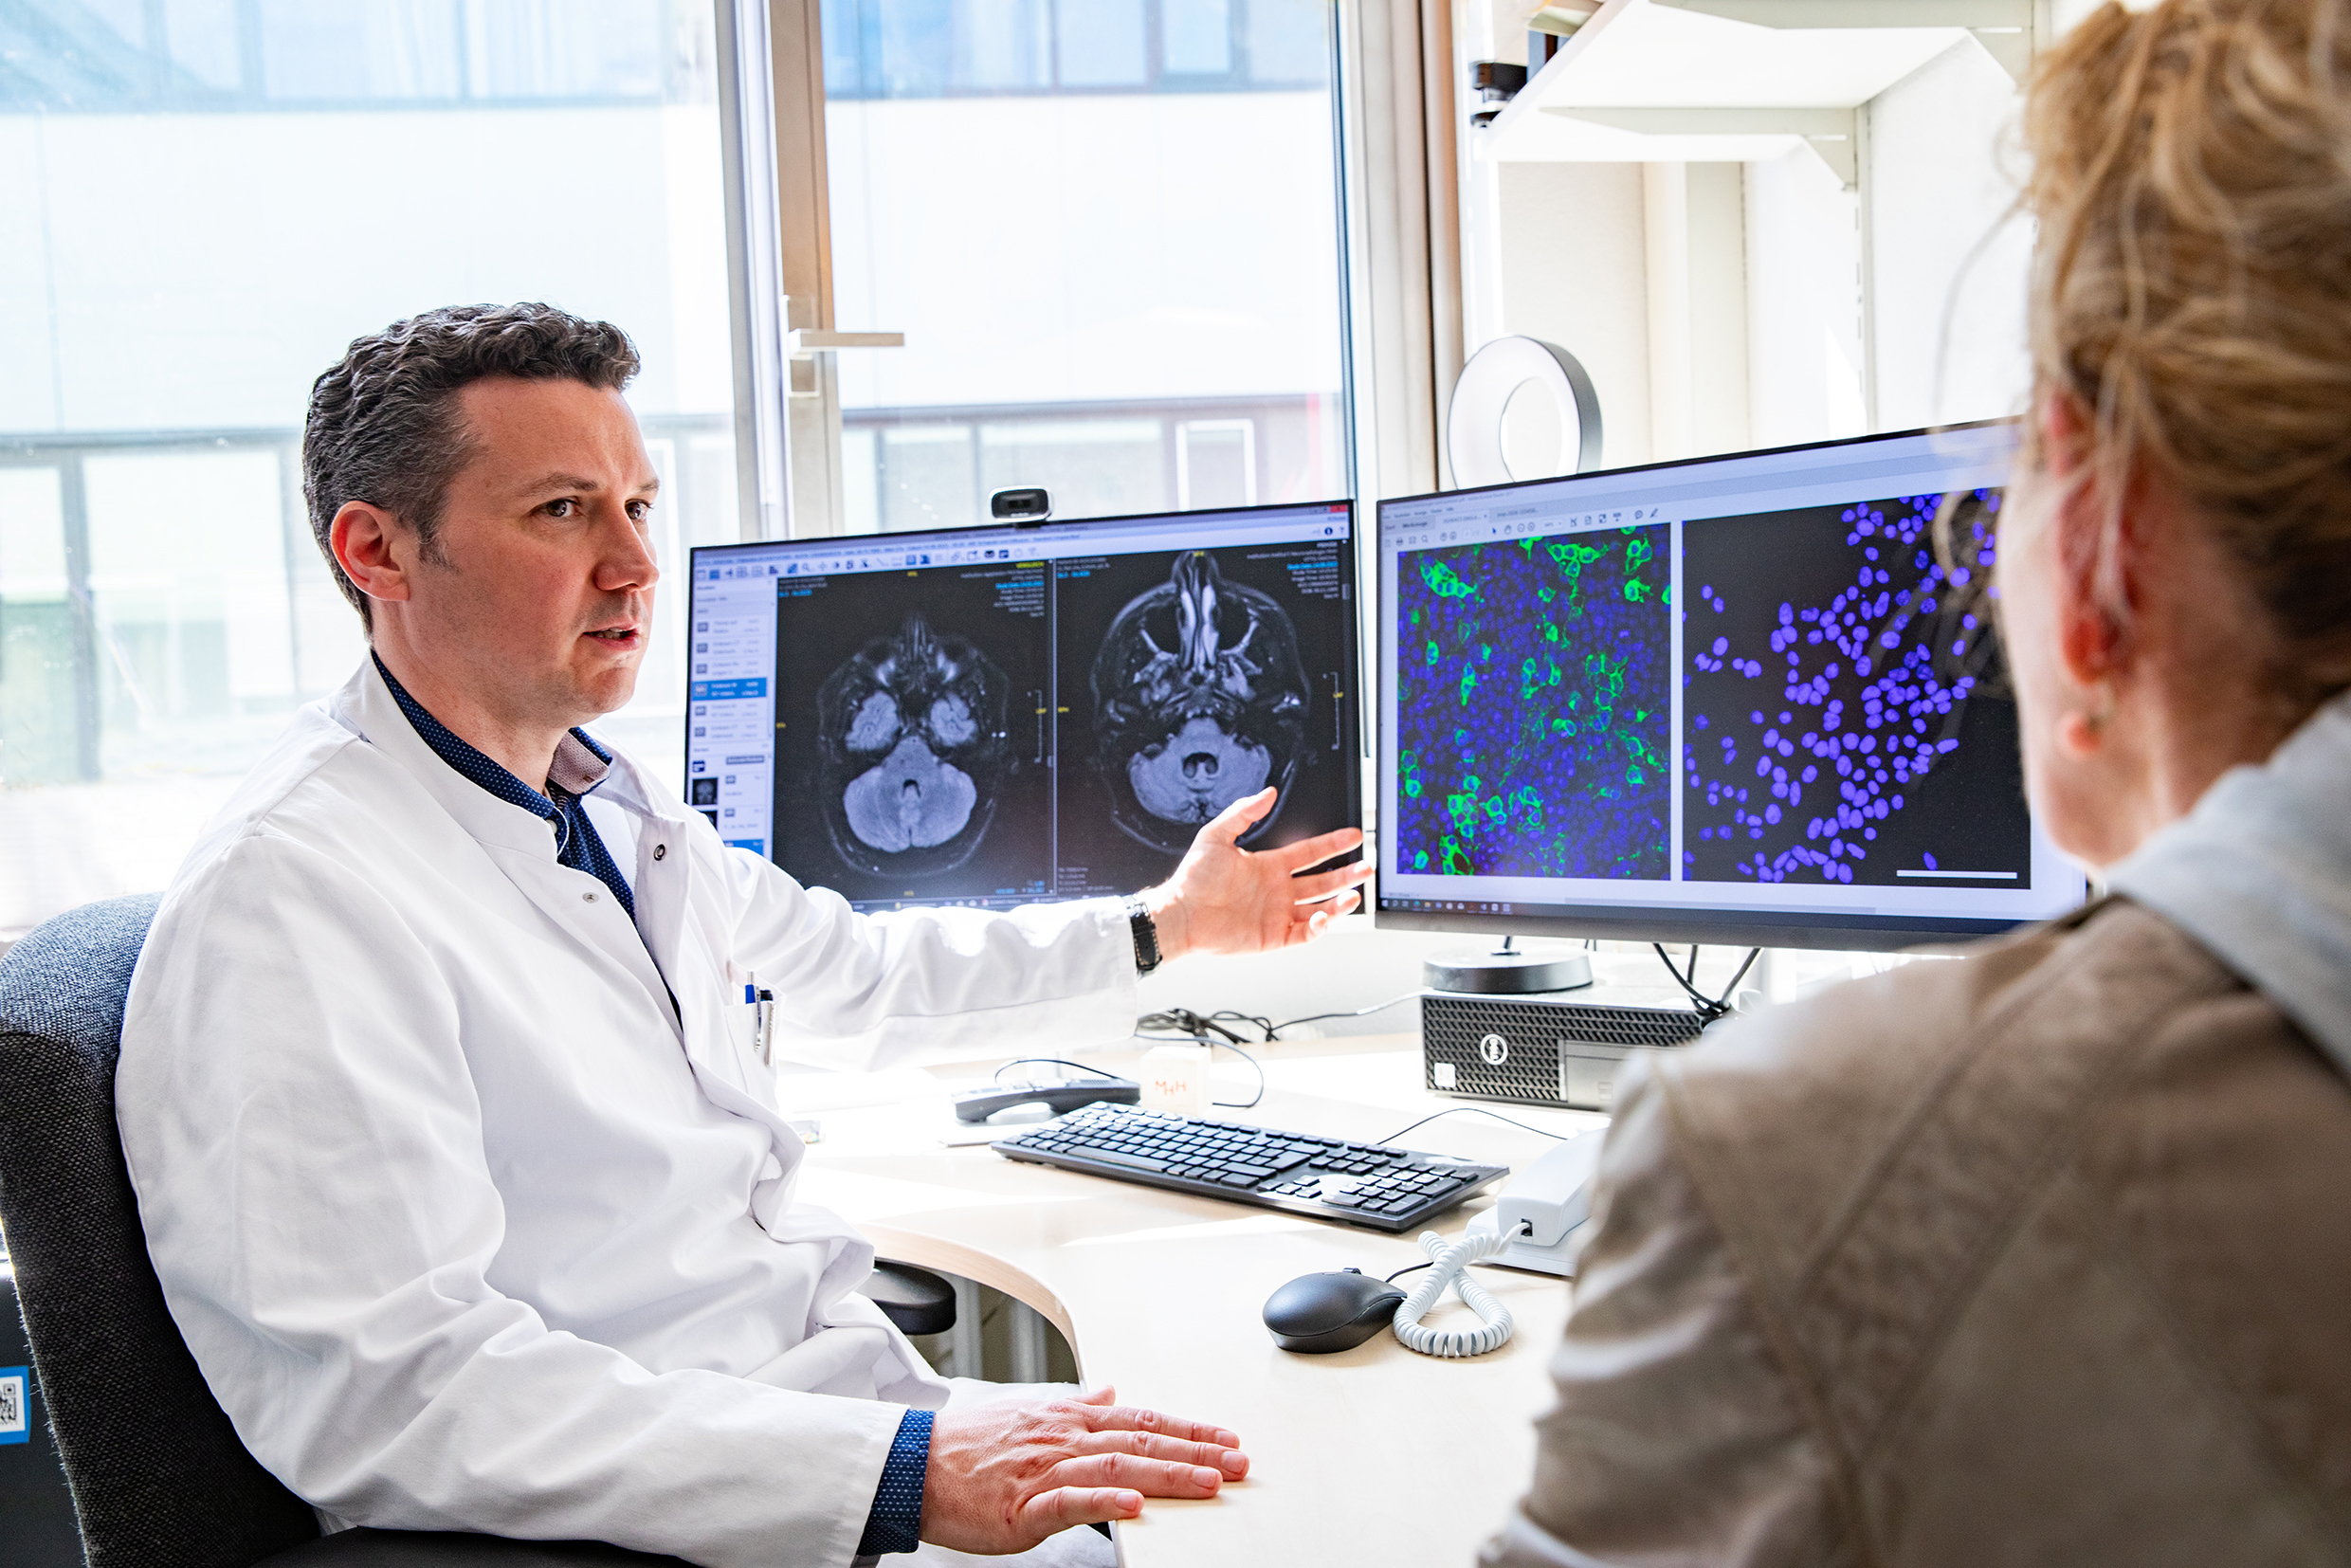 A doctor in a white coat sits in front of two screens with MRI images of the cerebellum and fluorescence microscope images of cell cultures.